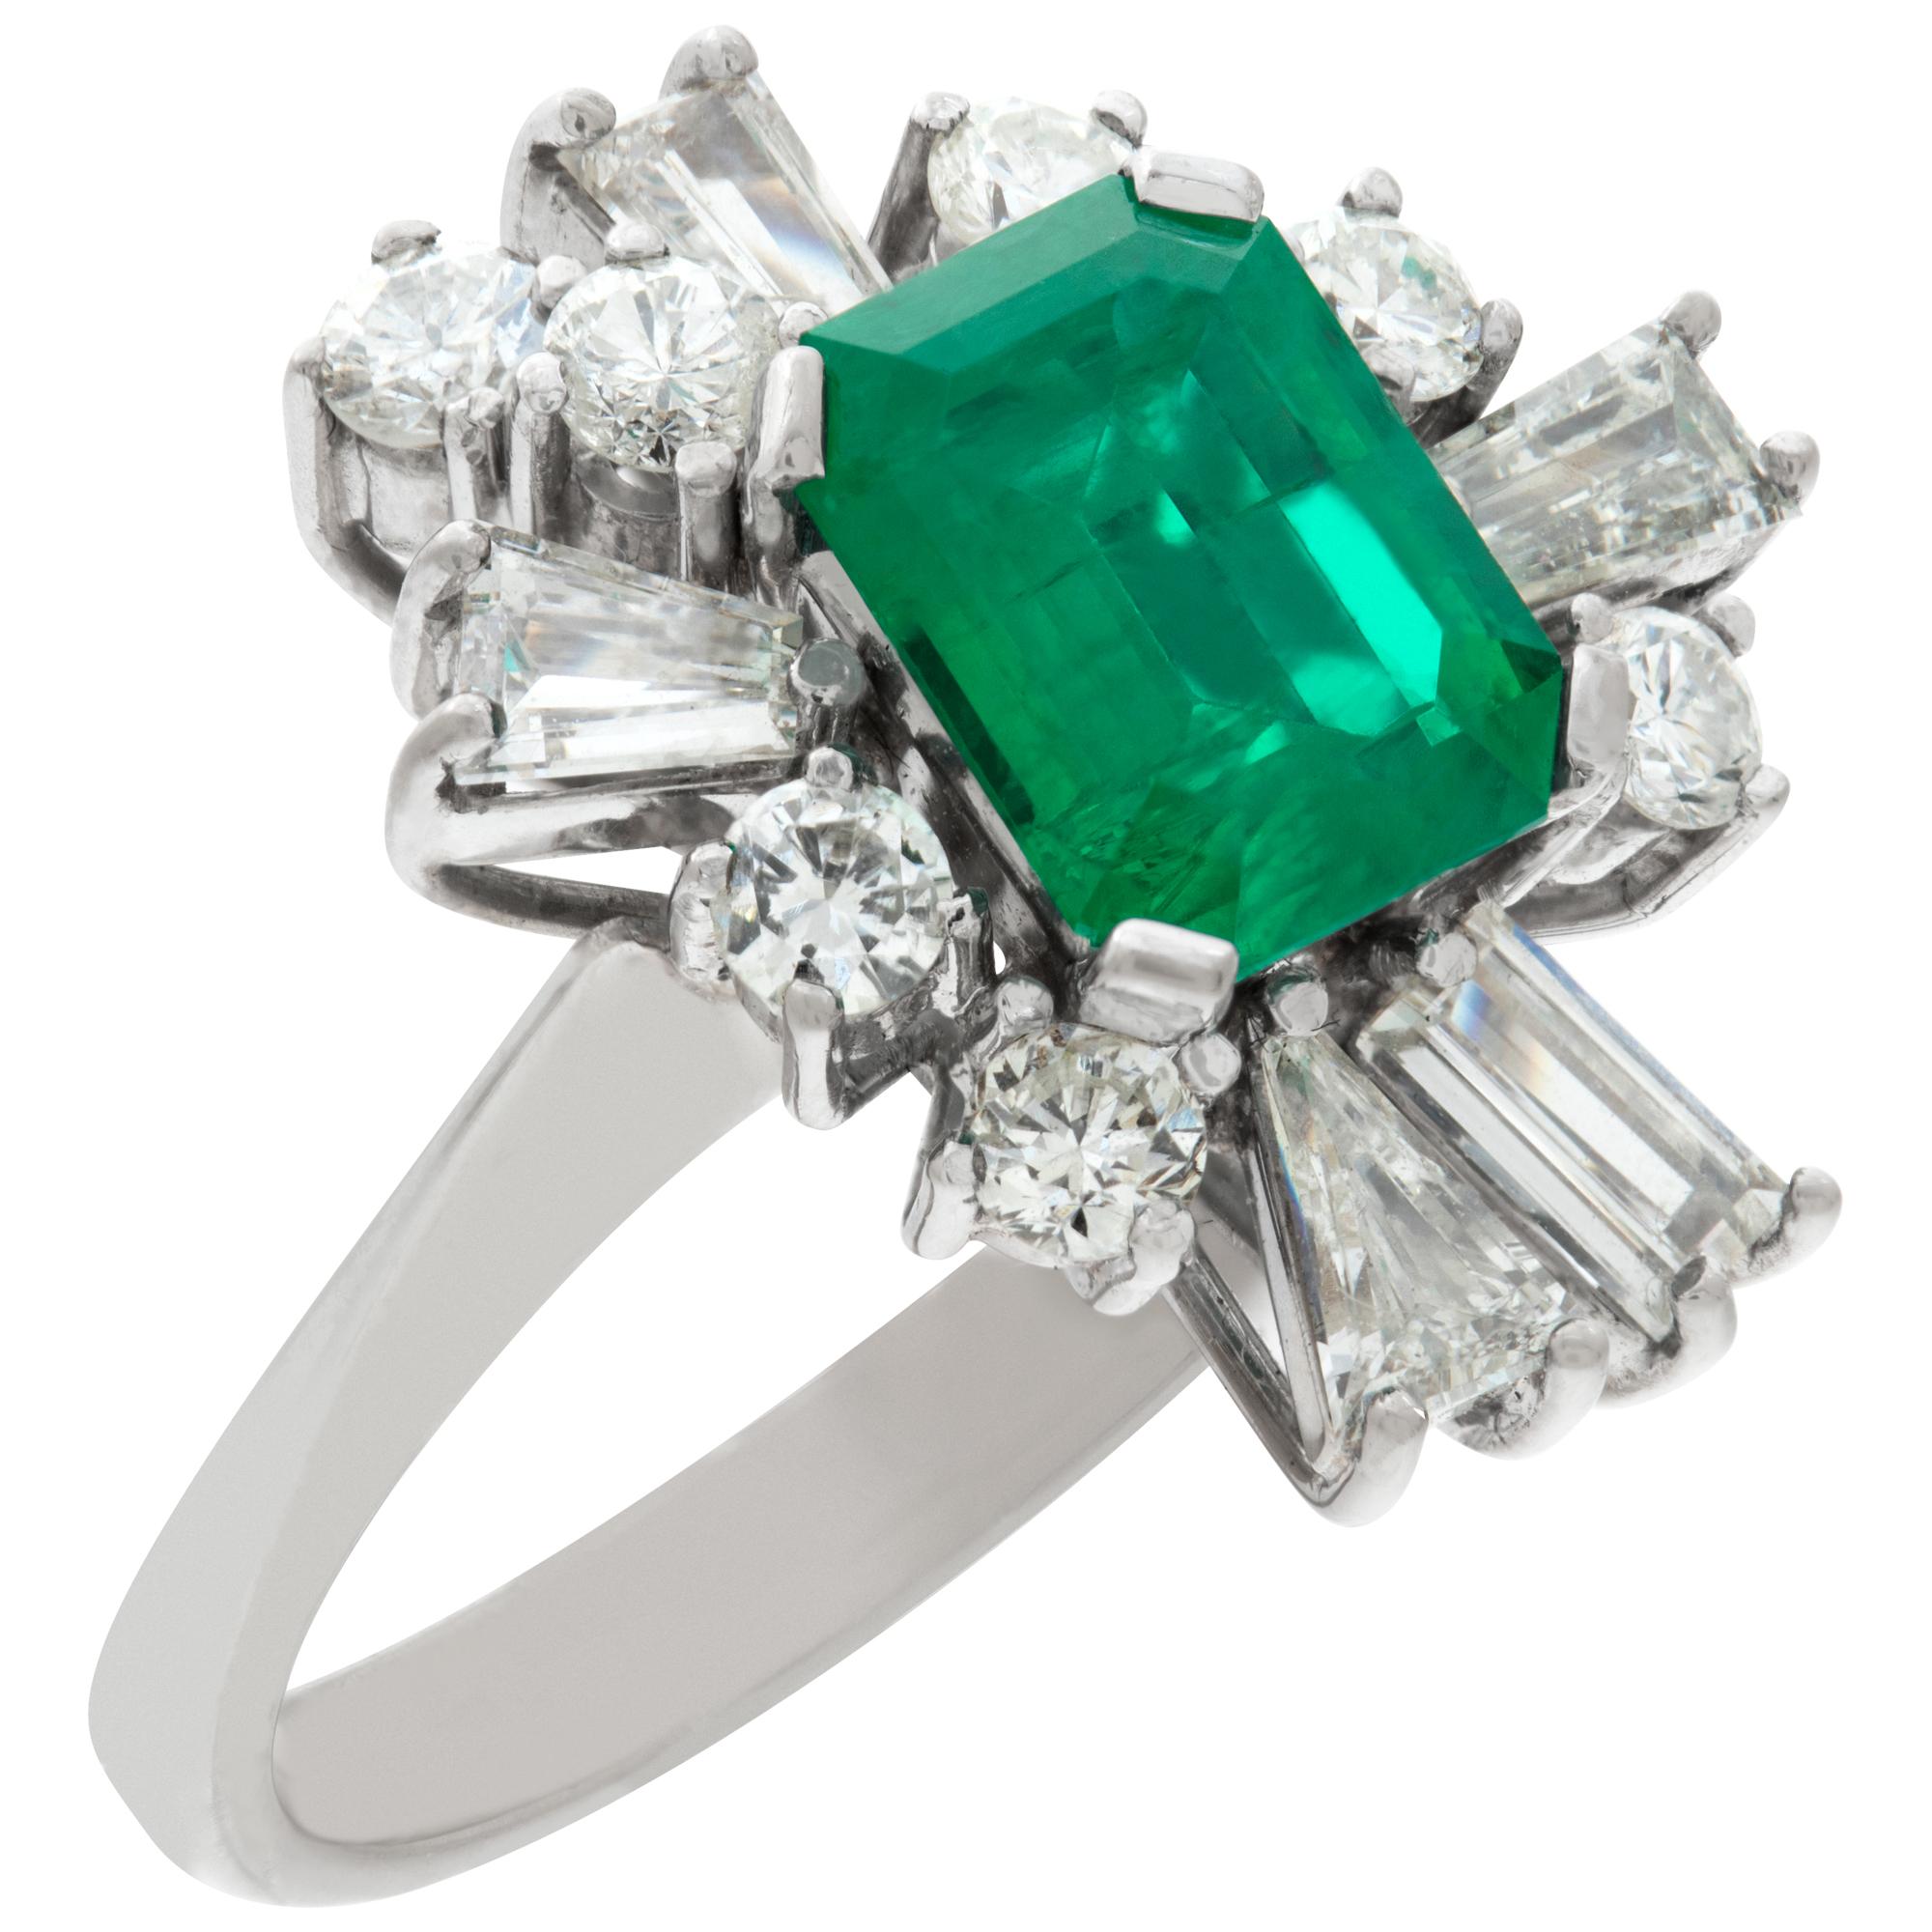 White gold emerald and diamond cocktail ring In Excellent Condition For Sale In Surfside, FL